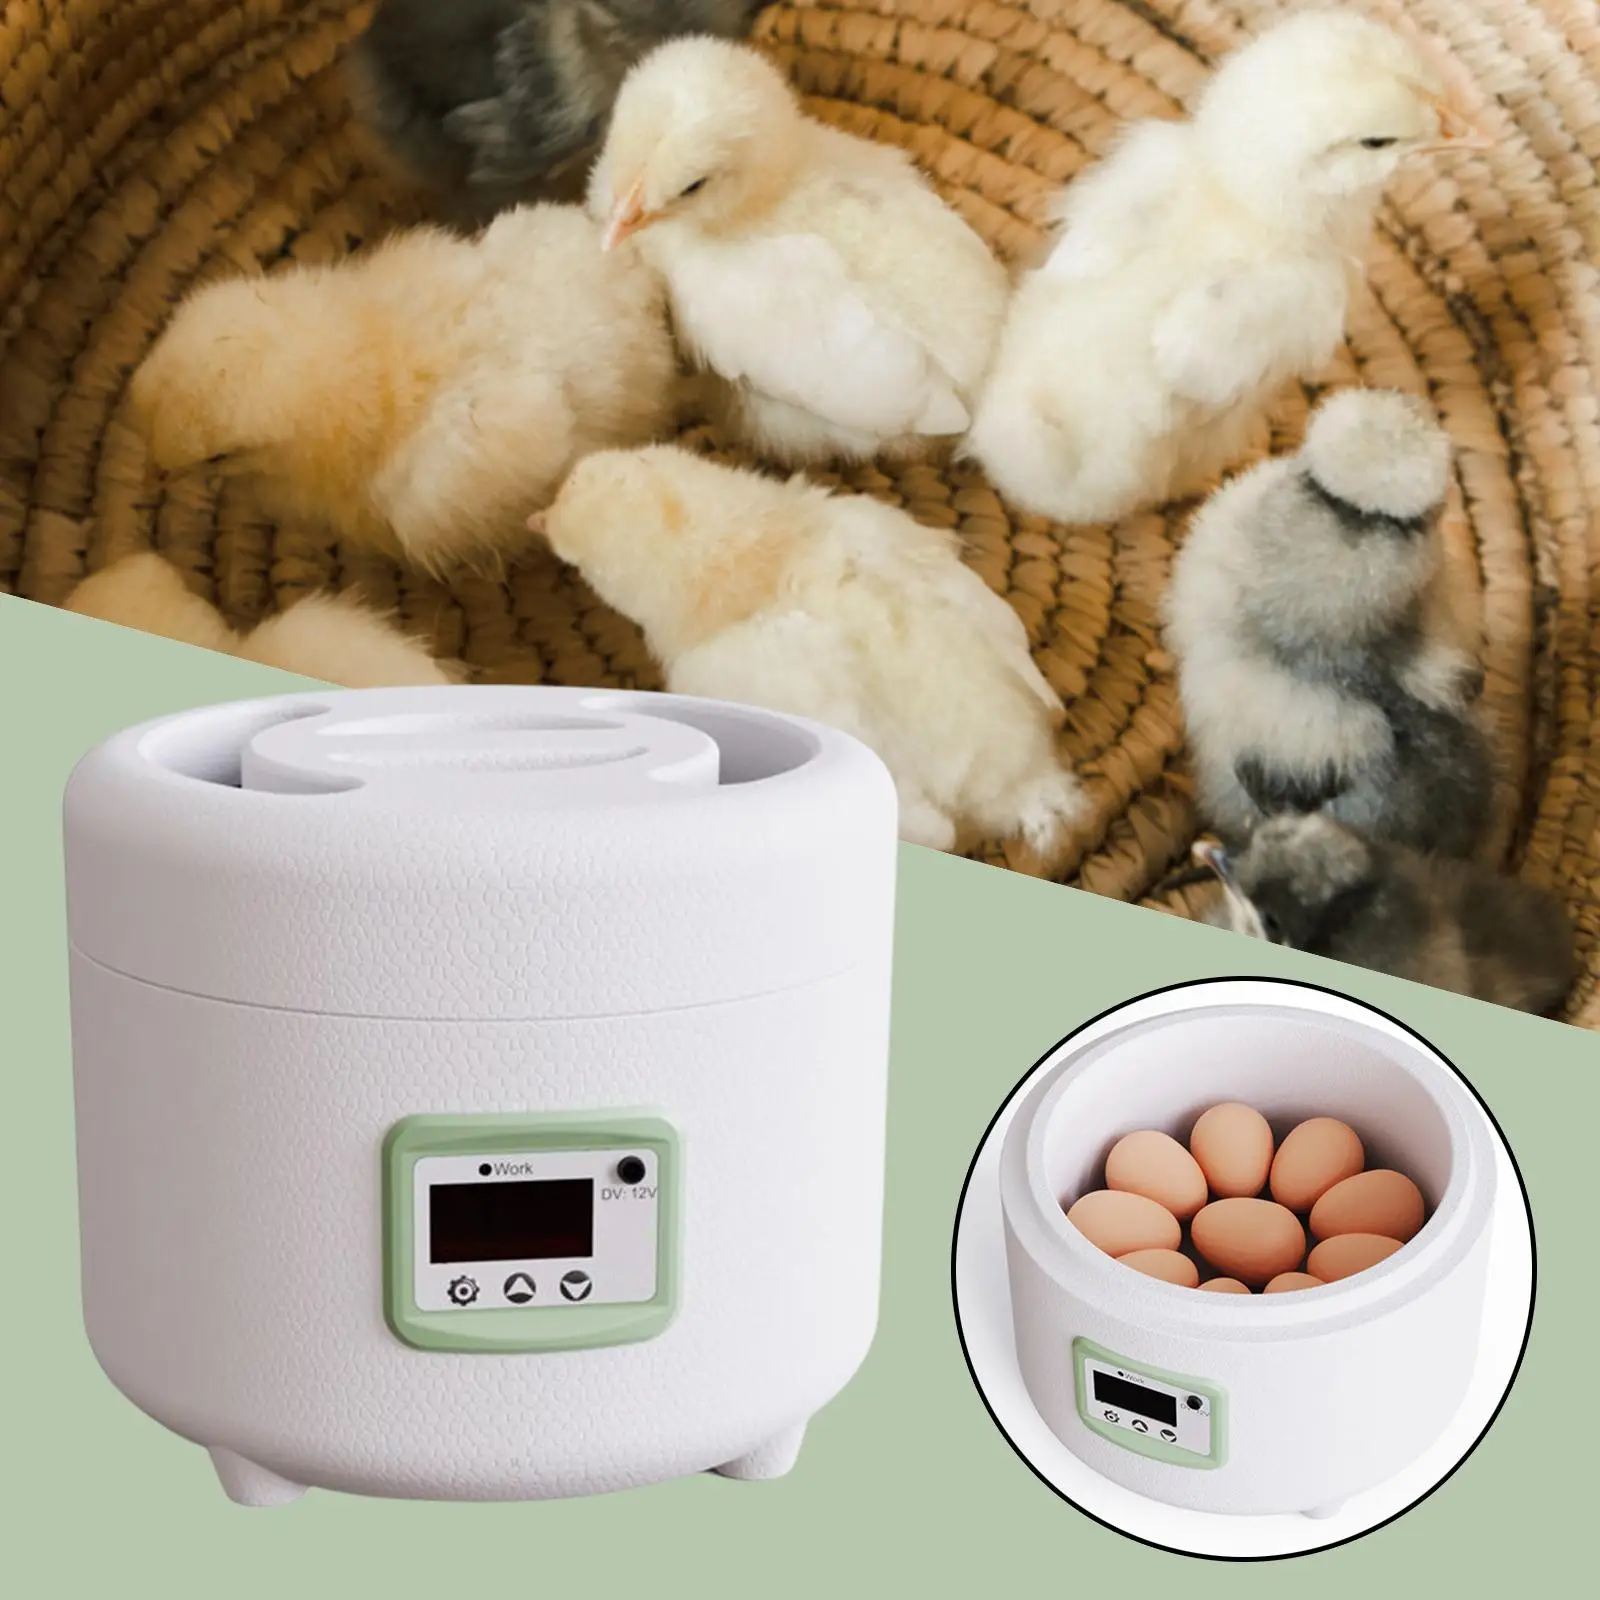 Digital Automatic Egg Incubator Dual Power Poultry Hatcher for Hatching Eggs